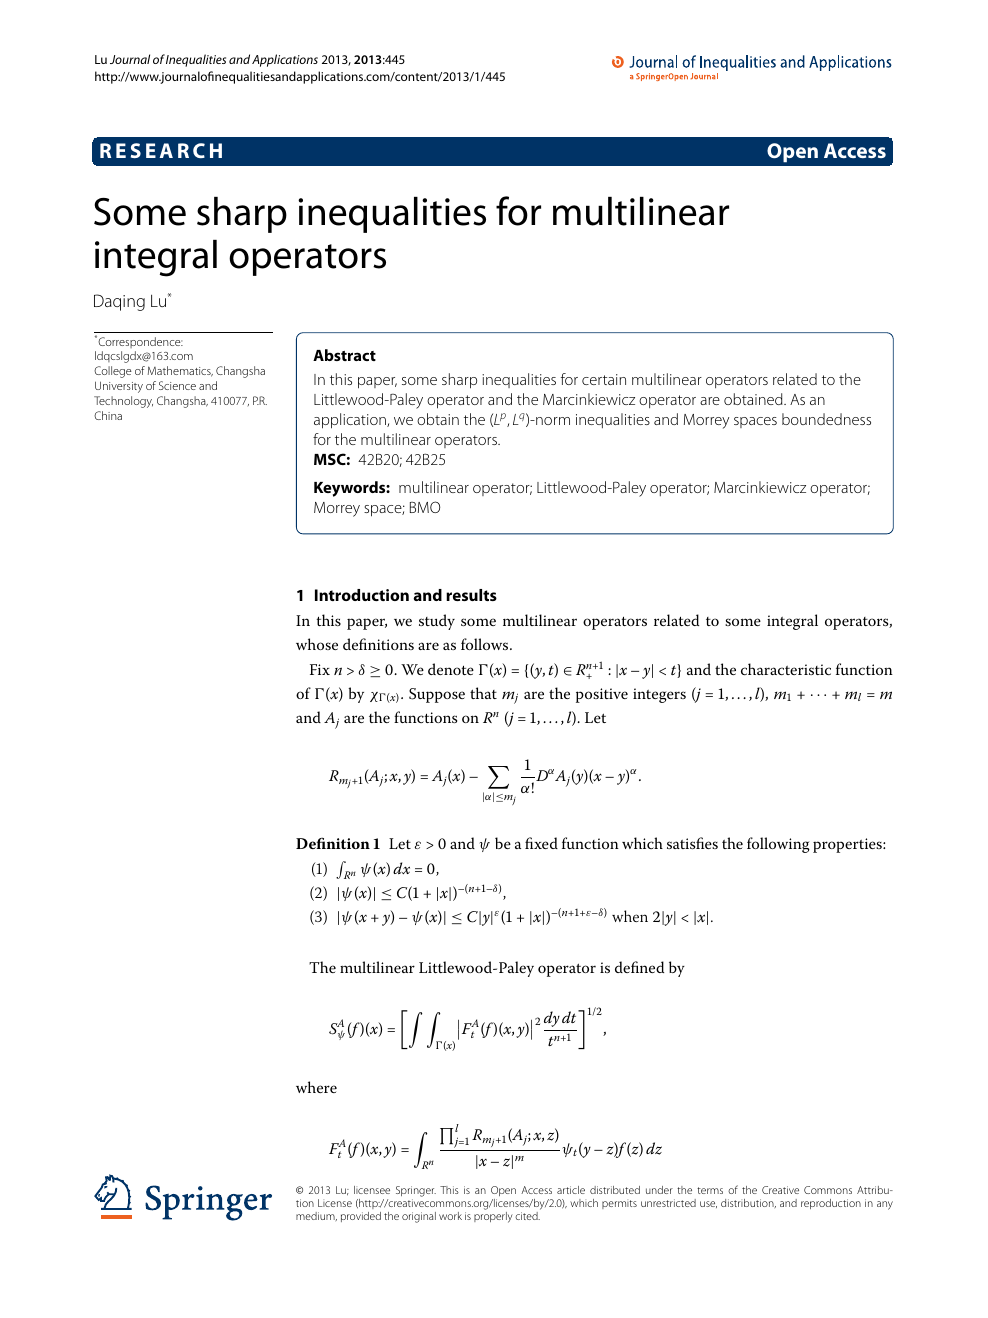 Some Sharp Inequalities For Multilinear Integral Operators Topic Of Research Paper In Mathematics Download Scholarly Article Pdf And Read For Free On Cyberleninka Open Science Hub